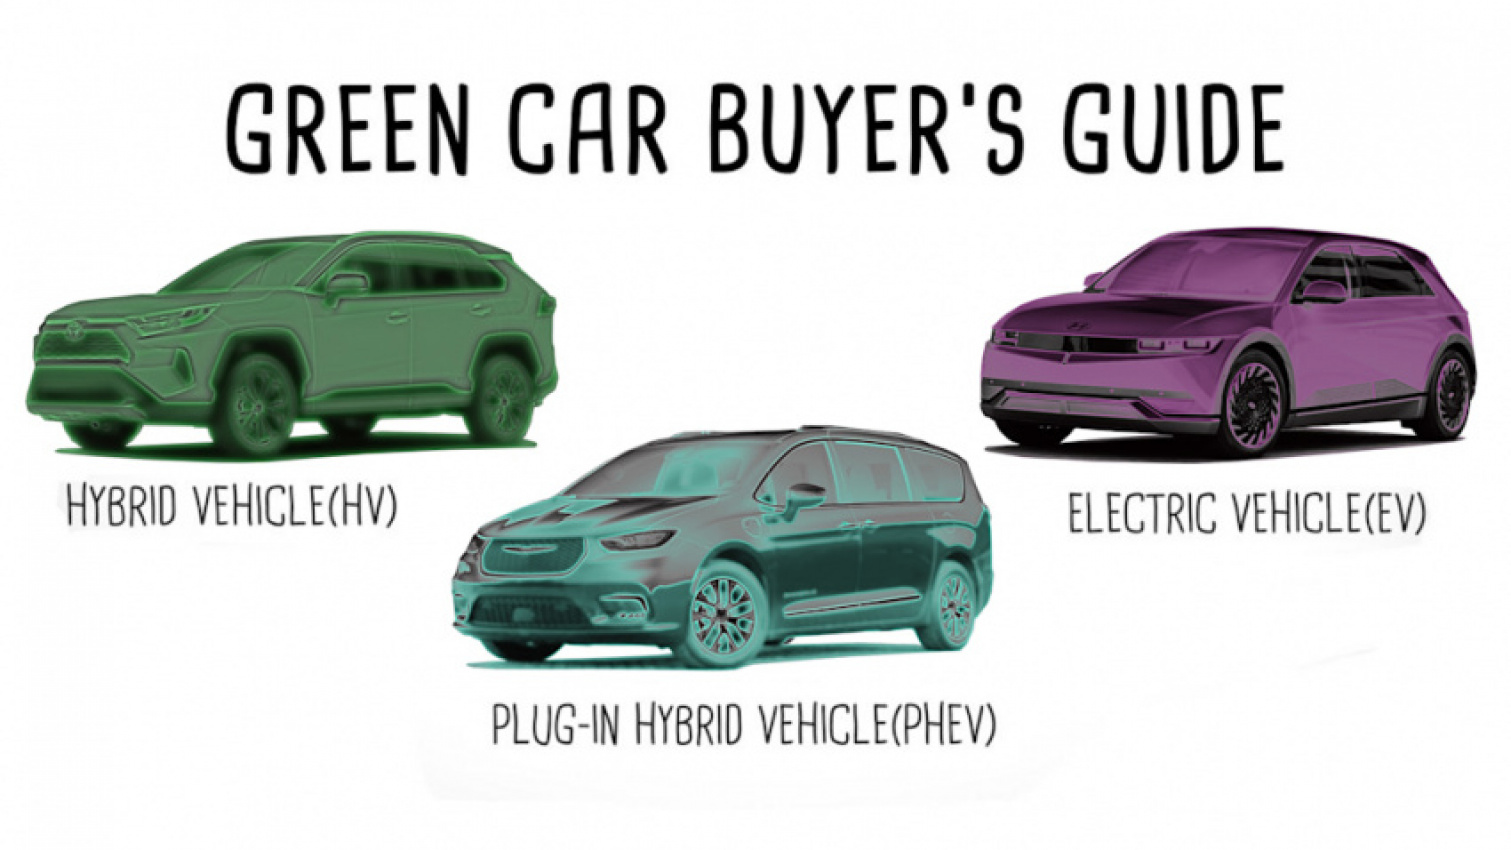 autos, cars, car buying, car dealers, green, green culture, green driving, original video, ownership, used car buying, video, videos, evs vs hybrids vs plug-in hybrids: what's the difference?